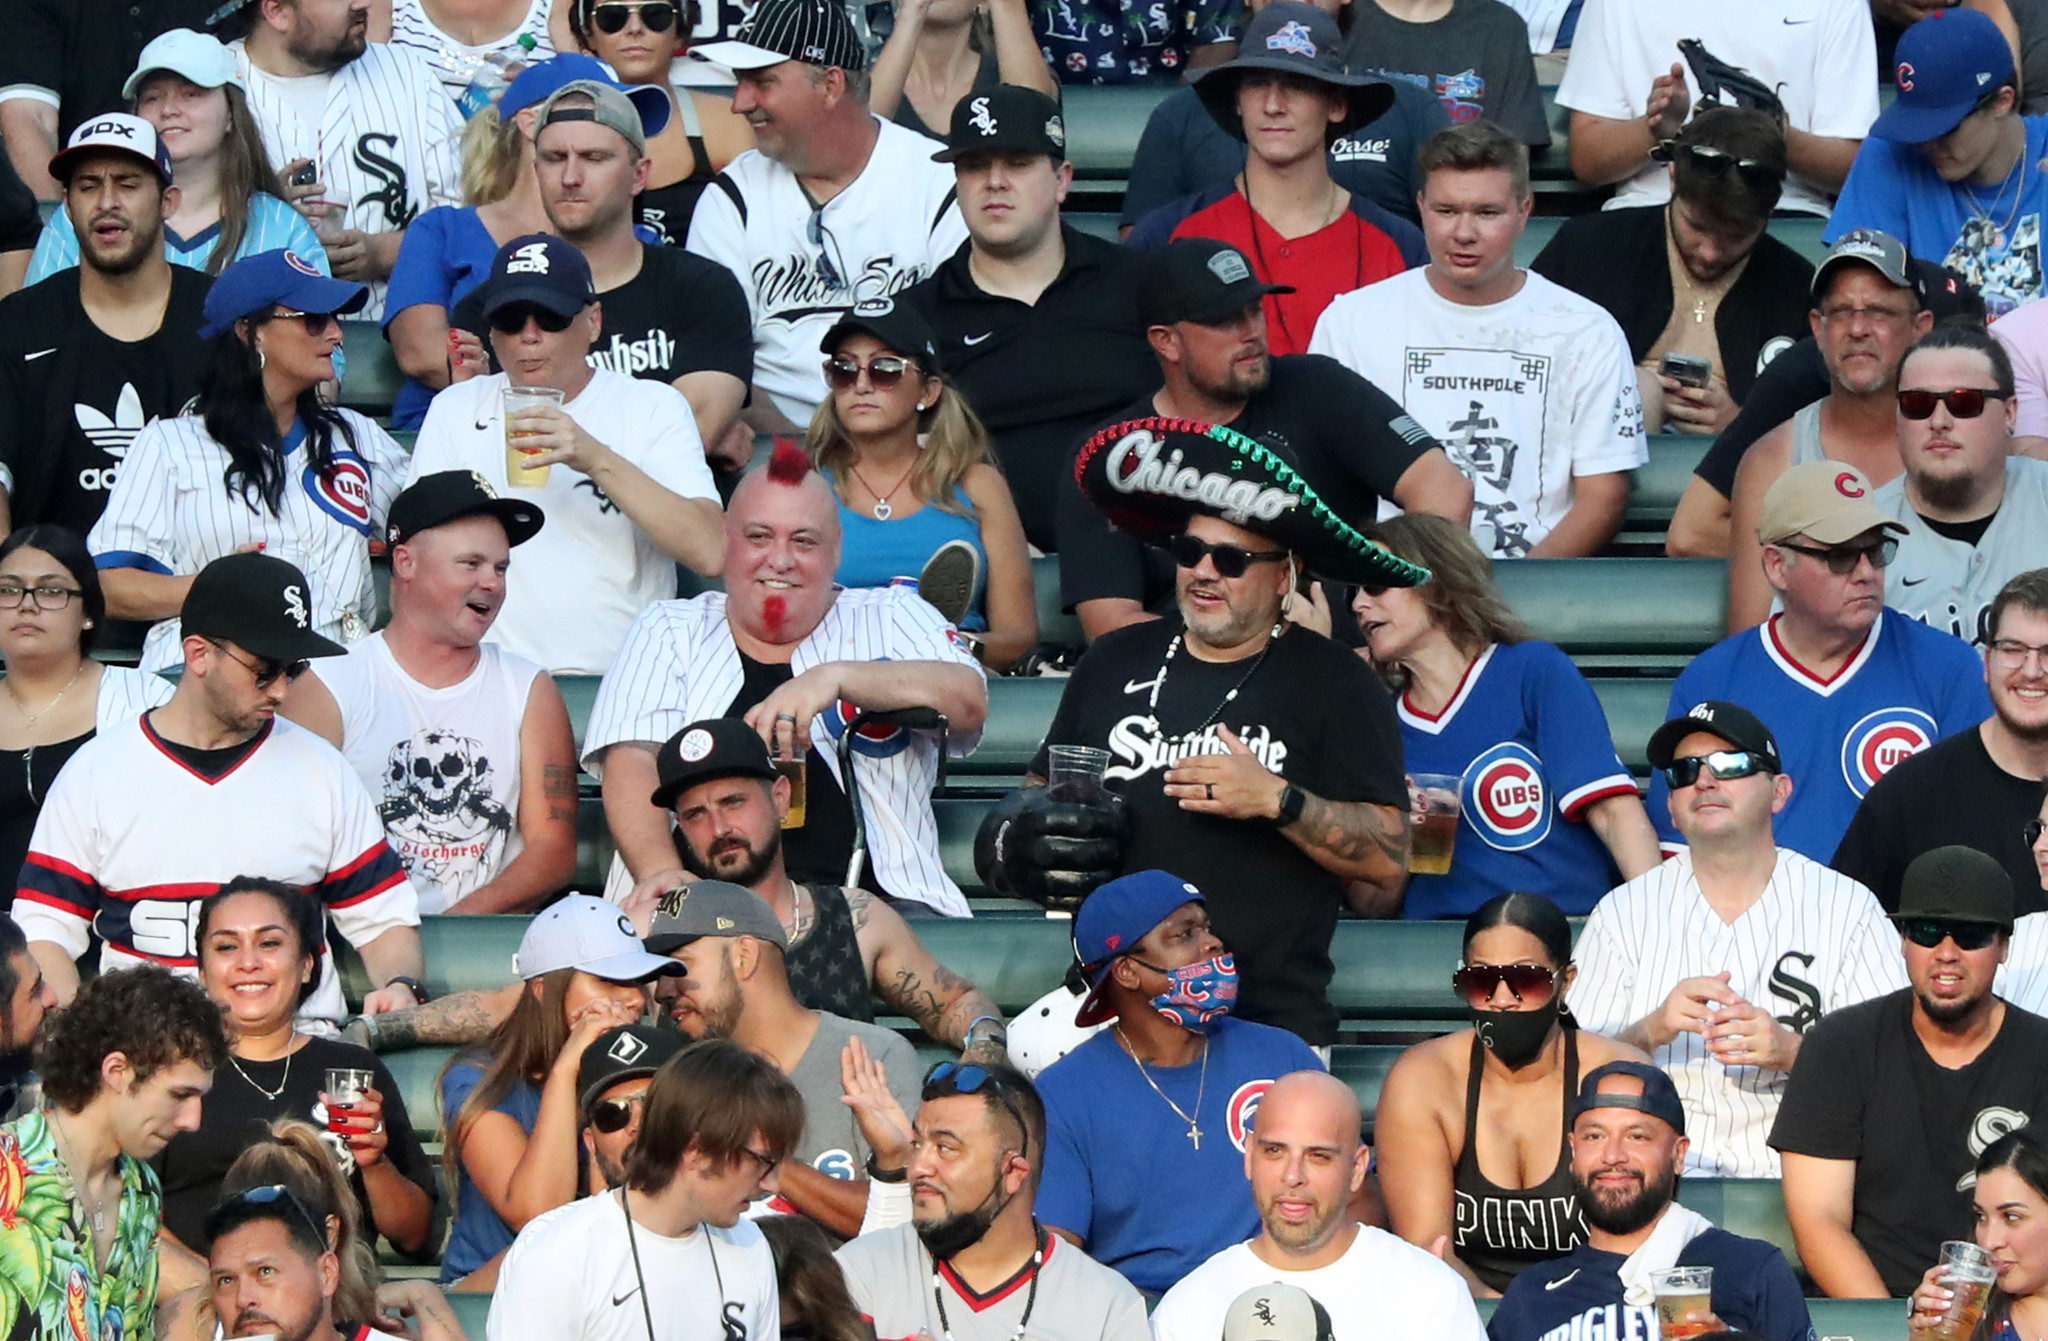 Chicago White Sox: What it's like in bleachers at Guaranteed Rate Field